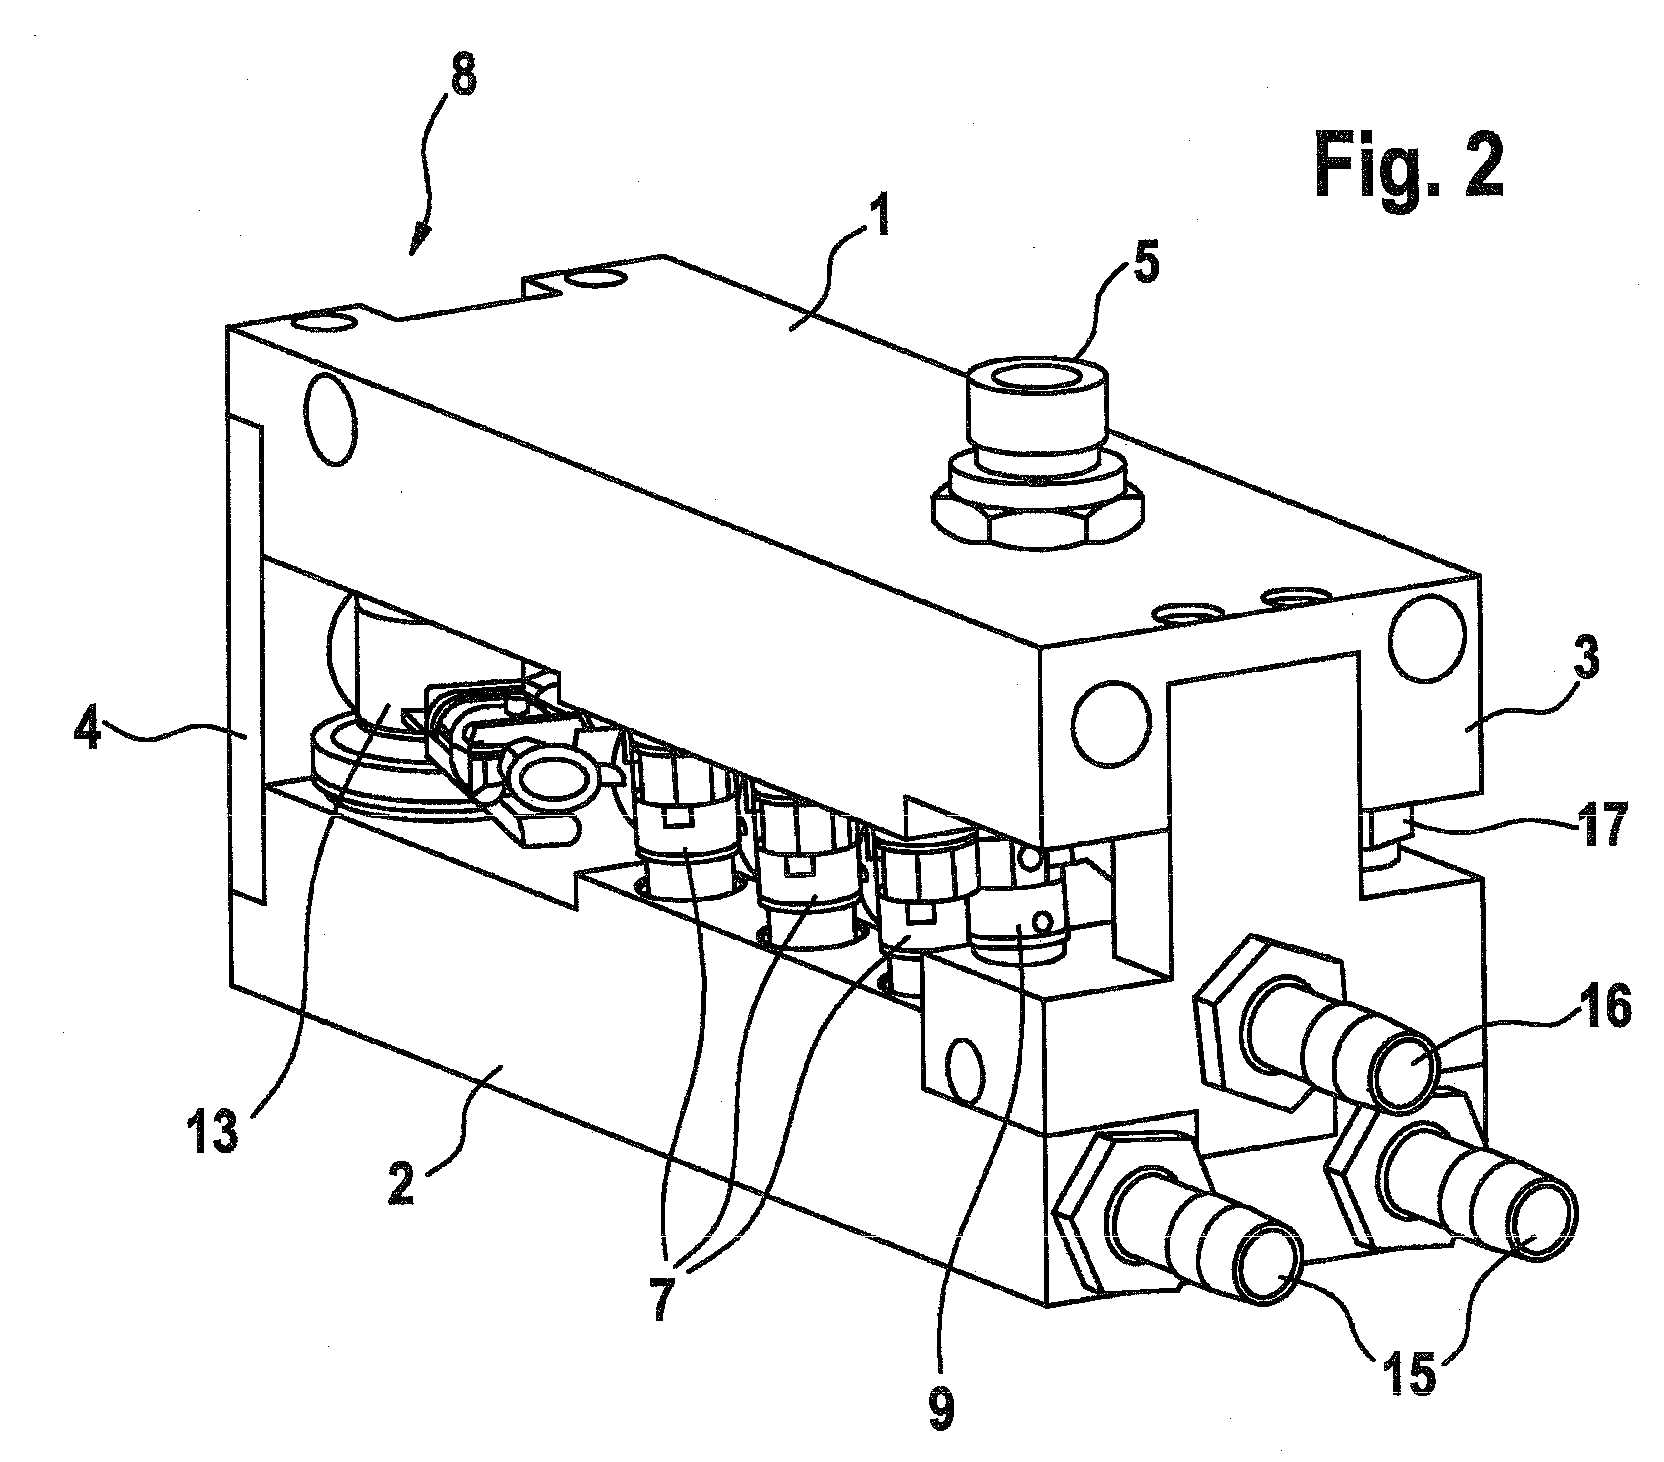 Fuel cell system with a metering unit